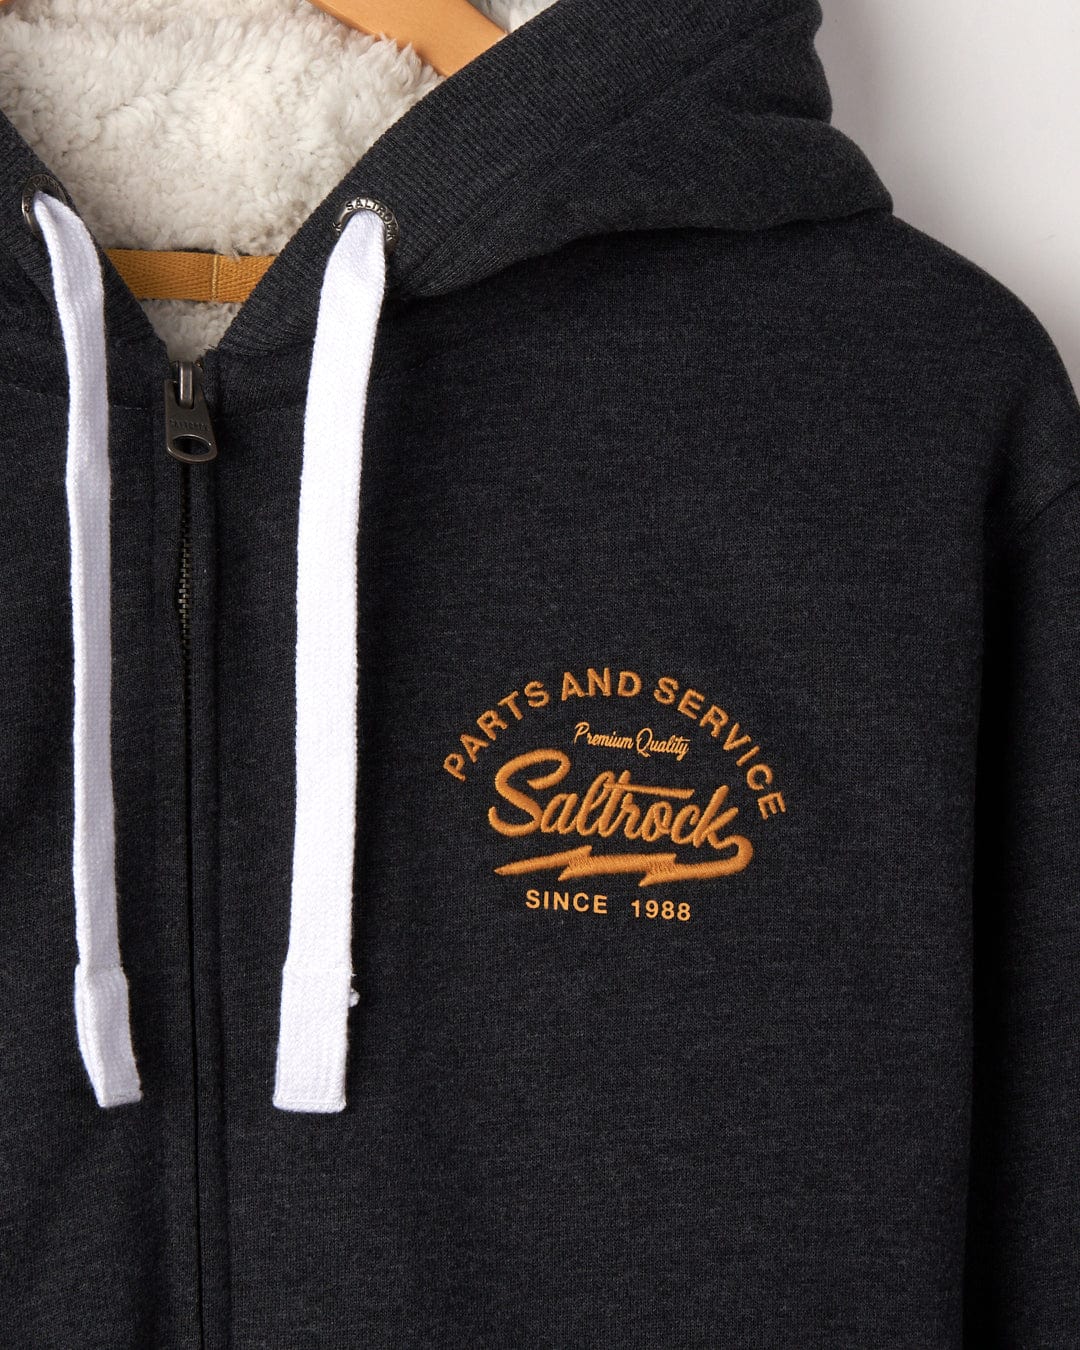 Close-up of a dark gray Vegas Script - Mens Borg Lined Zip Hoodie - Grey with Saltrock branding embroidered in chain stitch on the left side, featuring white drawstrings and a partial view of a Borg-lined hood.